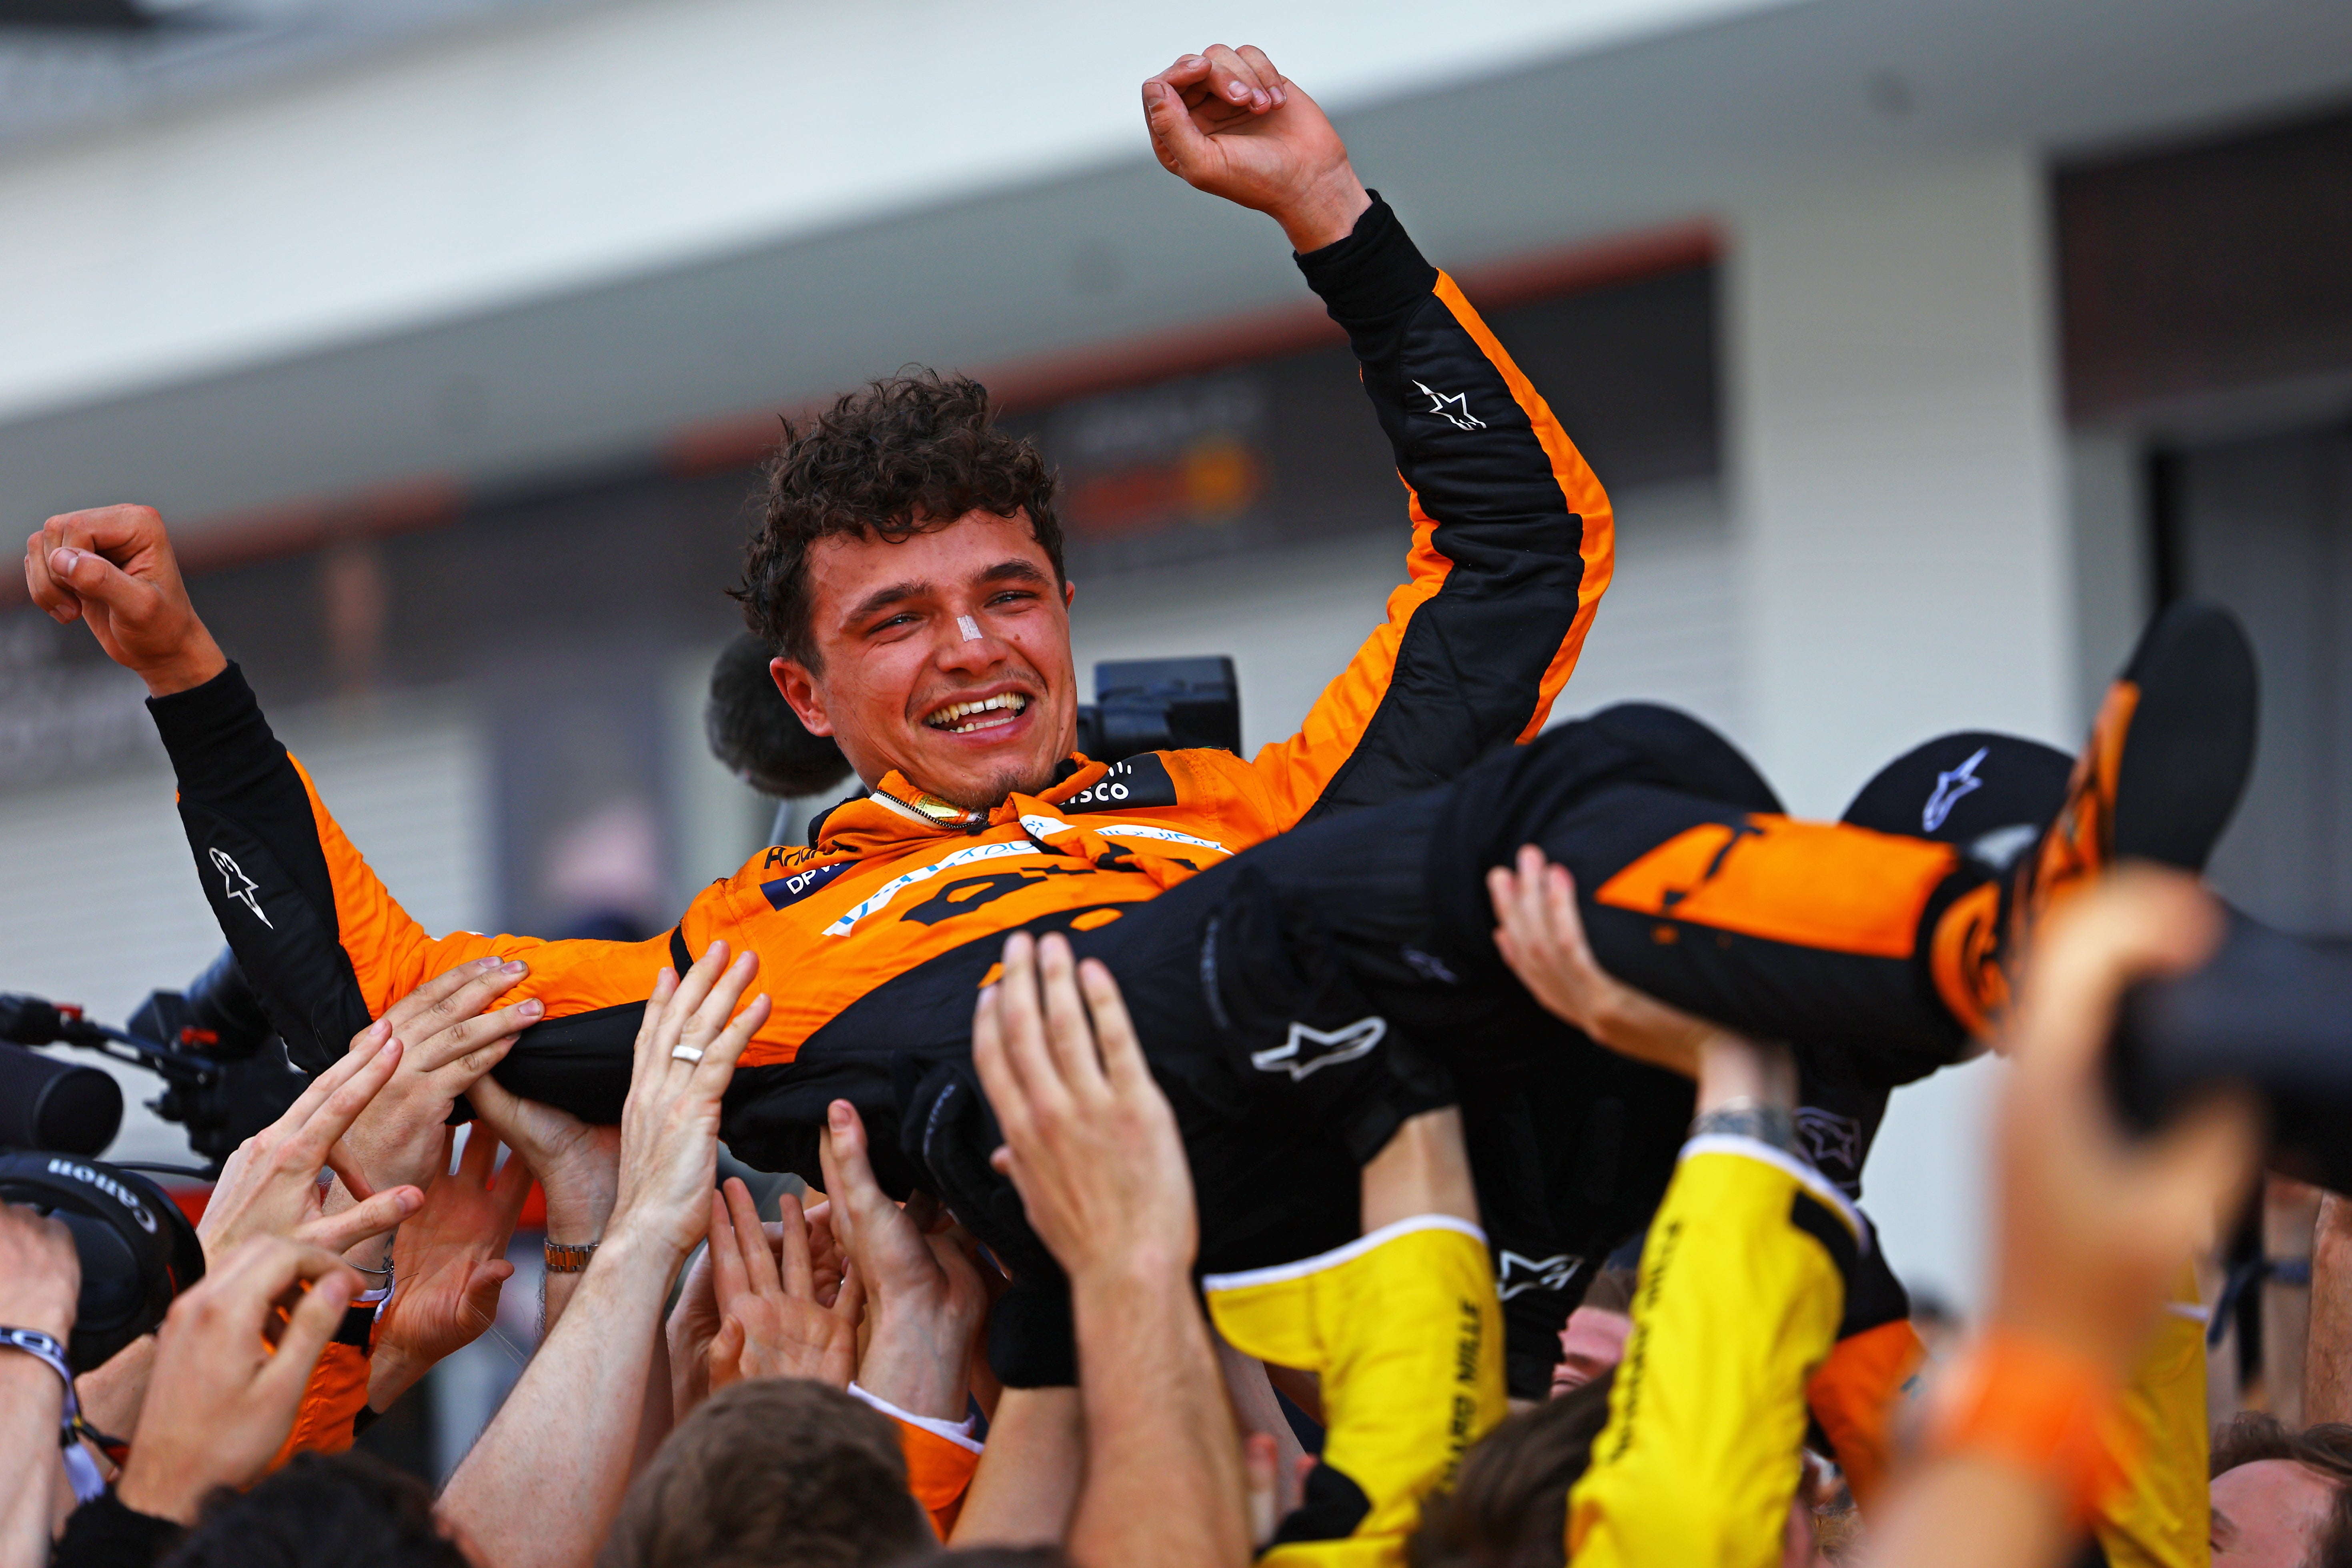 Lando Norris claimed his first victory in Formula One two weeks ago in Miami